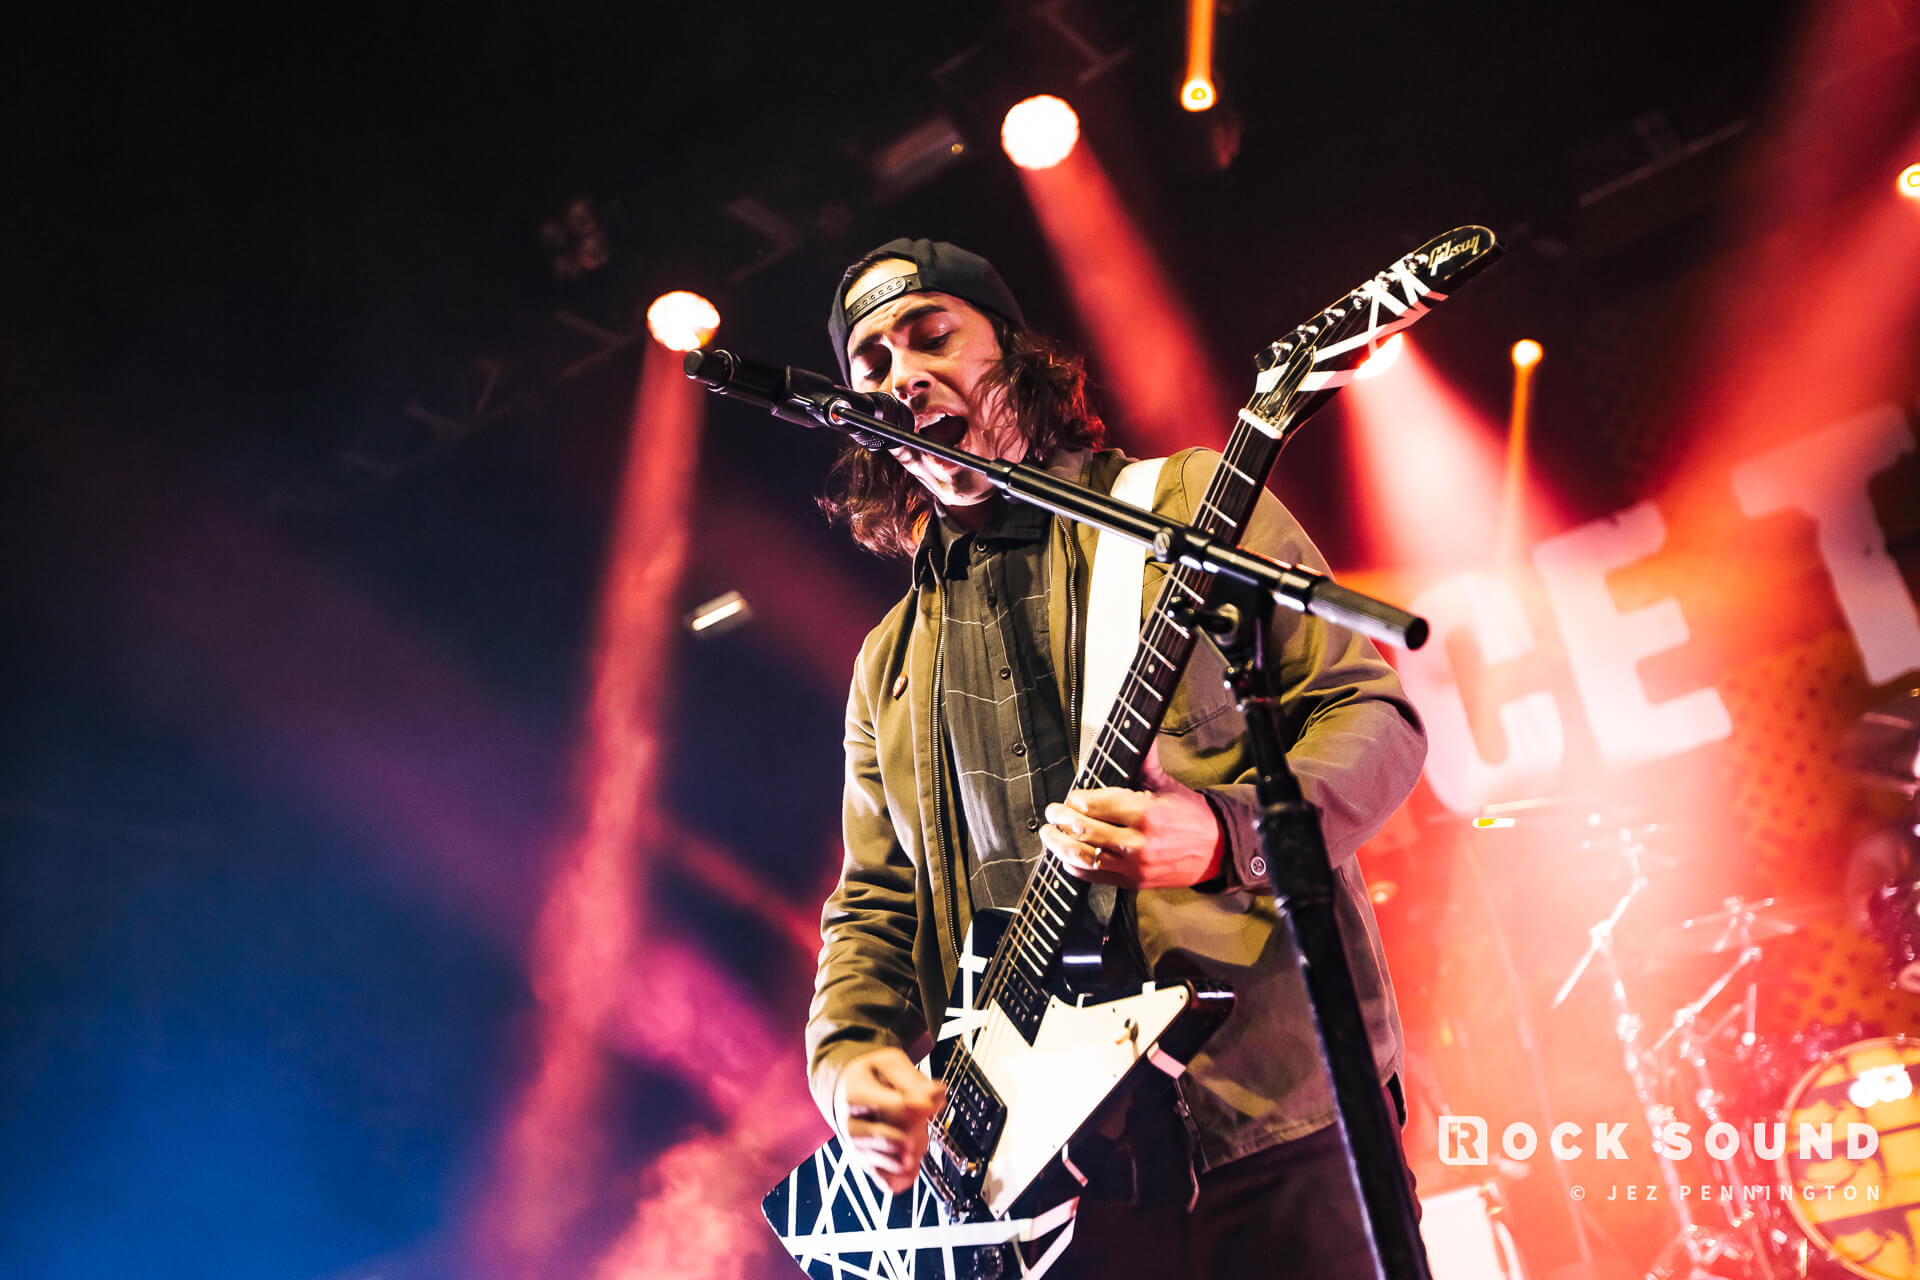 GALLERY: Pierce The Veil’s Utterly Electric Show In London